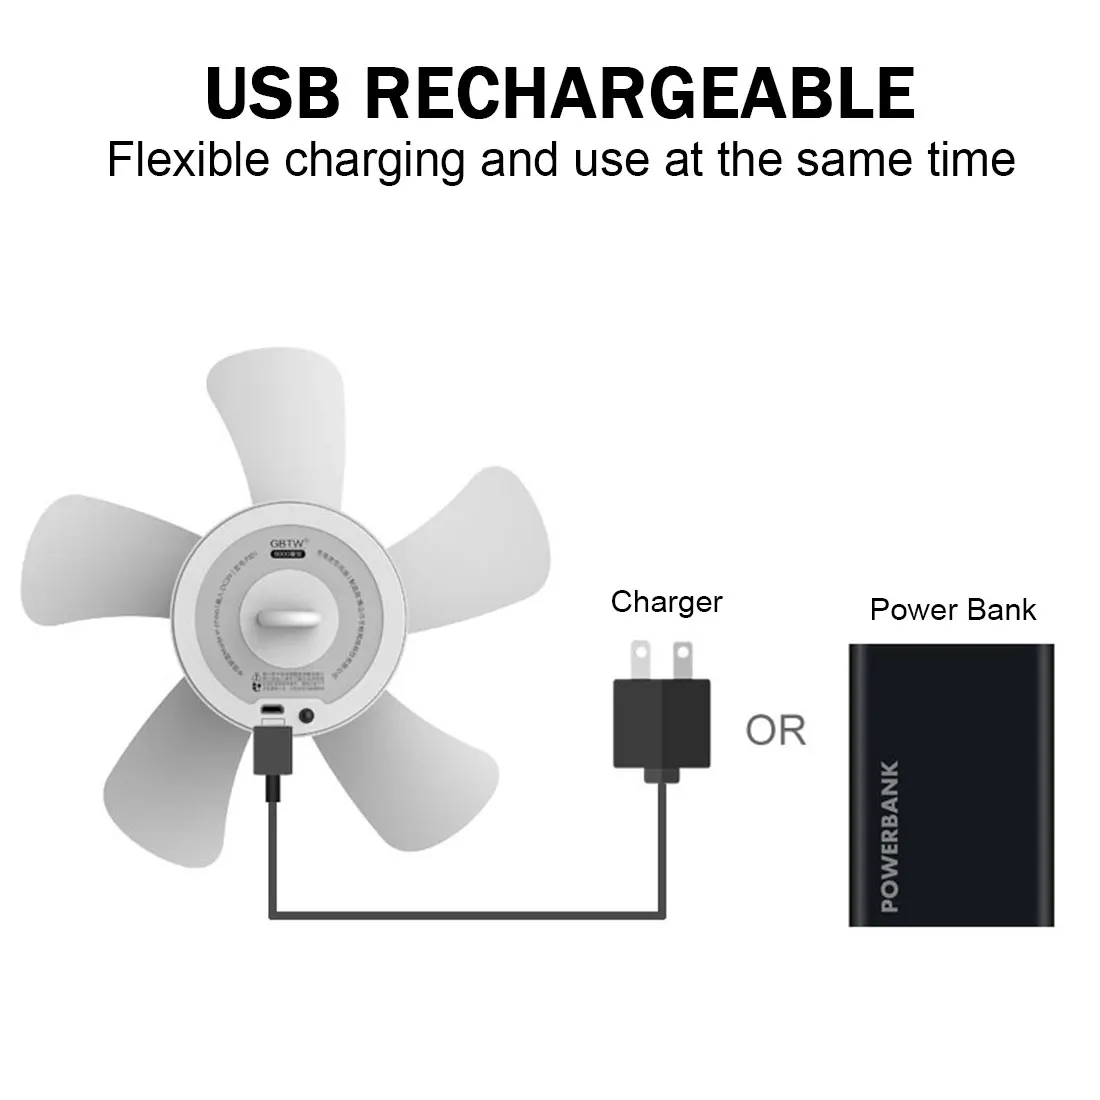 

5V Remote Control Timing USB Ceiling Fan 4000/8000mAh USB Rechargeable 4 Gears Ceiling Fan for Tent Bed Universal